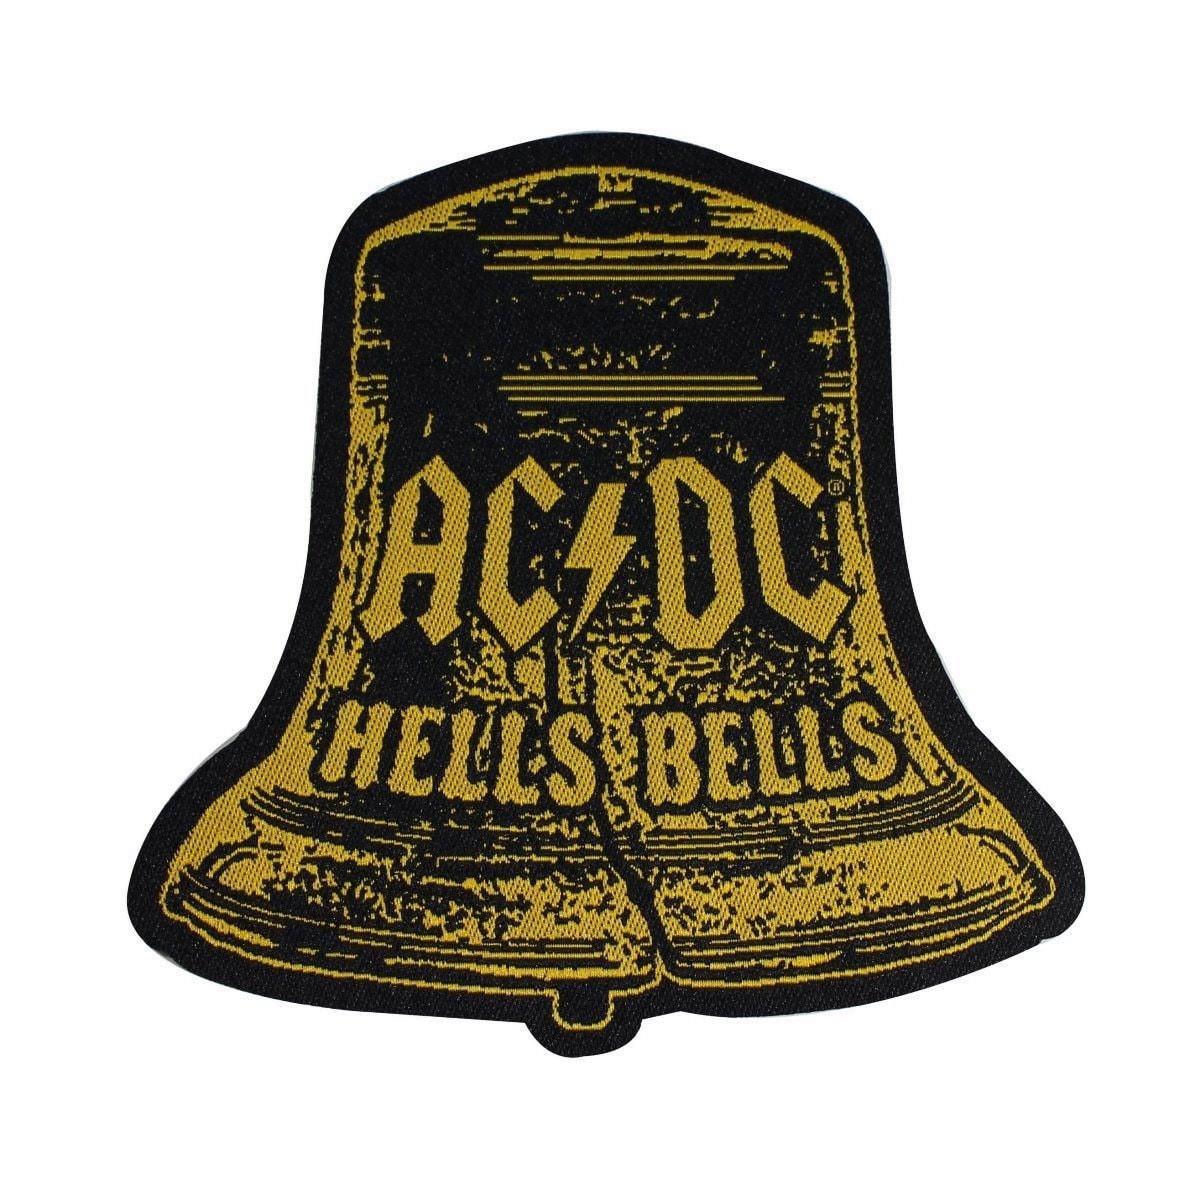 ACDC ACDC Bell Patch Hard Blues Rock Heavy Metal Rock and Roll Music Band